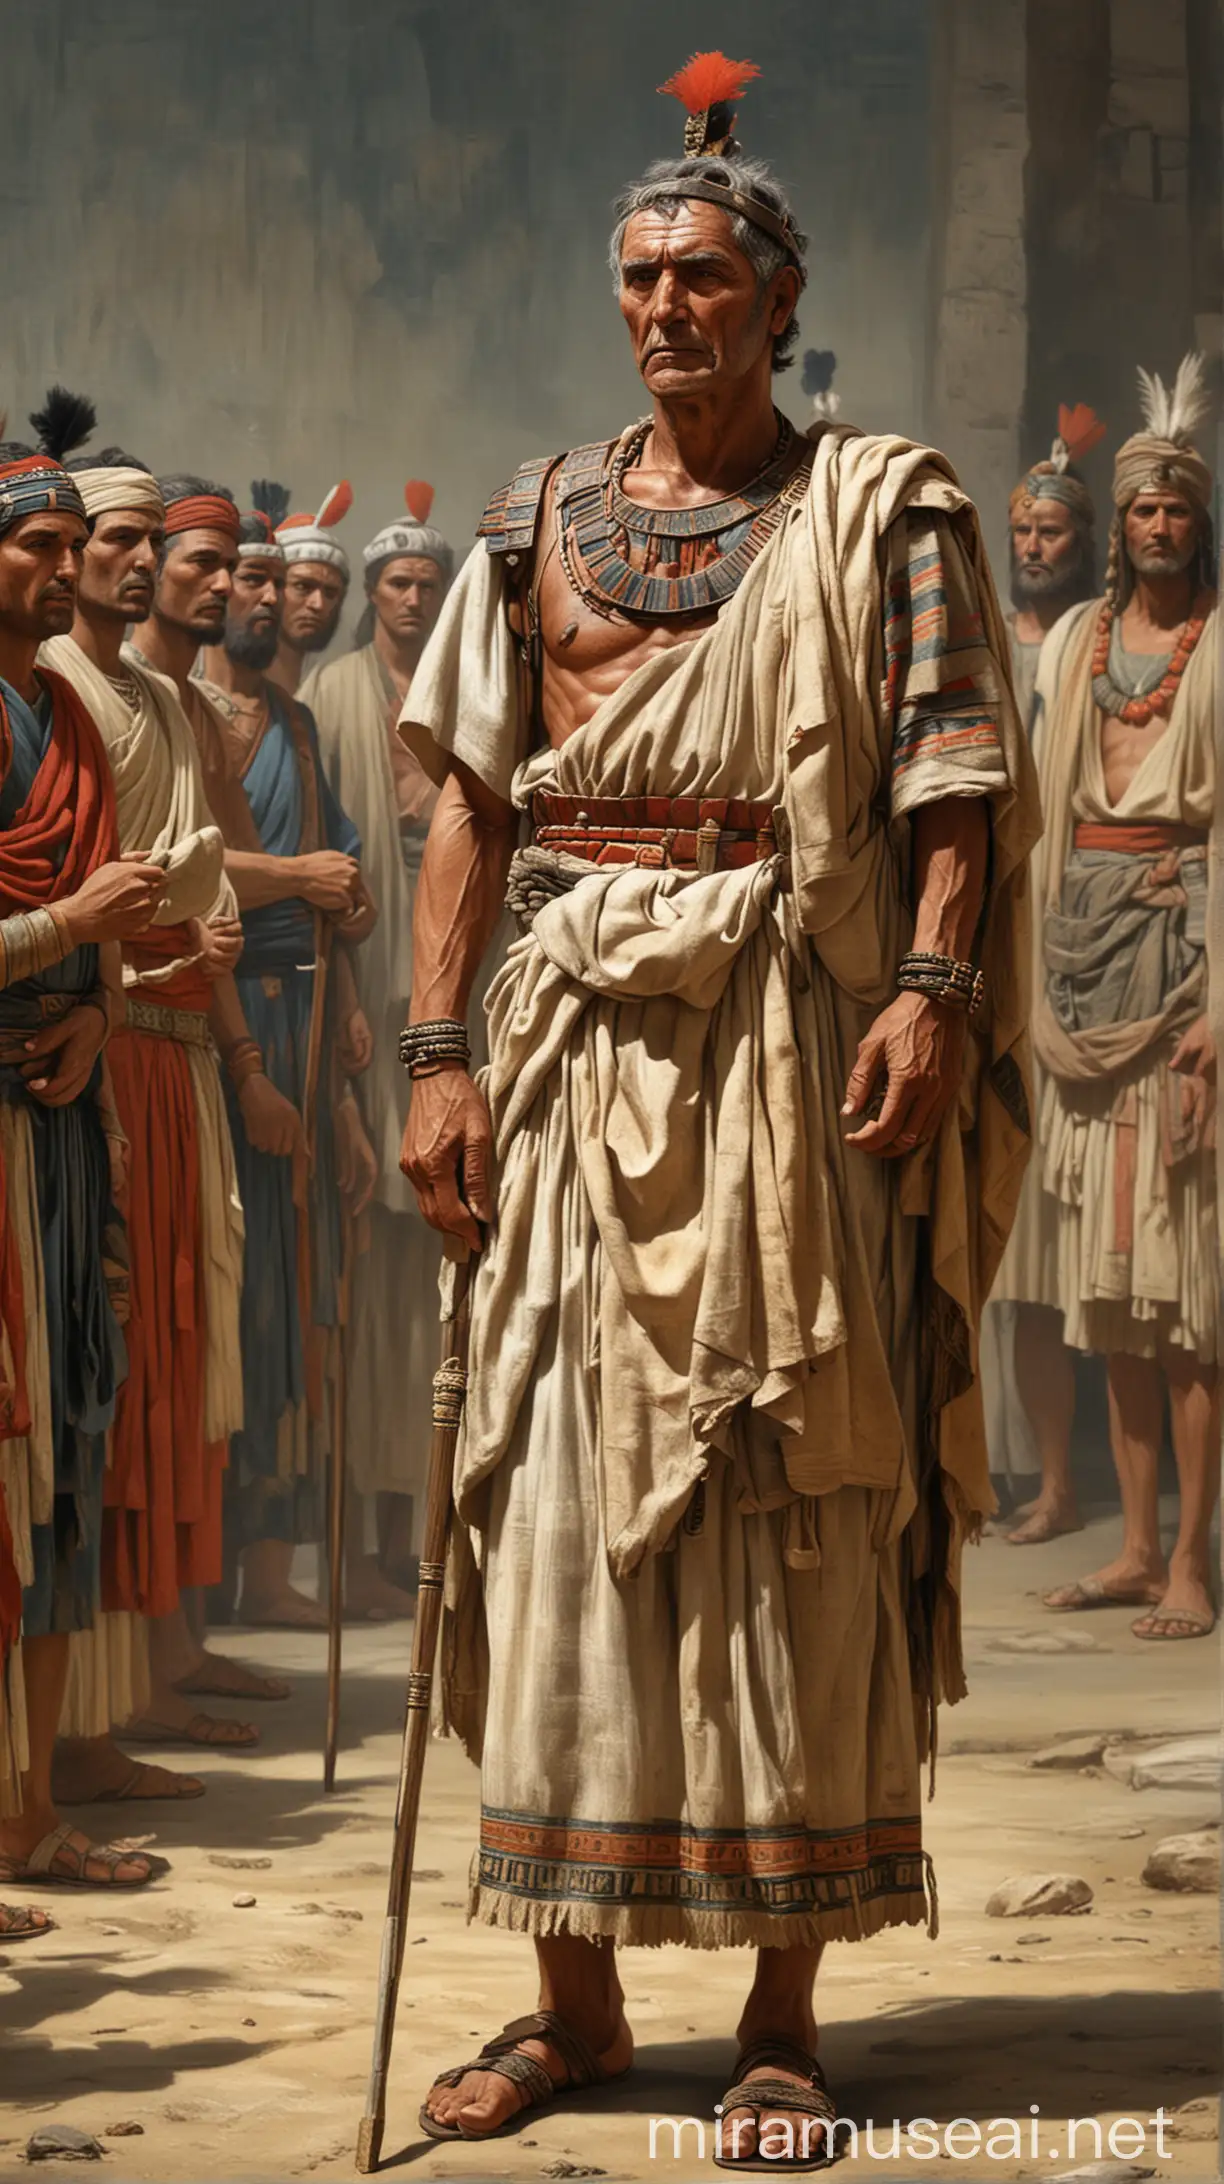 A solemn 5th-century BC leader named Nebai, whose name means 'fruitful,' standing among other leaders in ancient attire, with a determined expression, preparing to sign an important agreement.In ancient world 